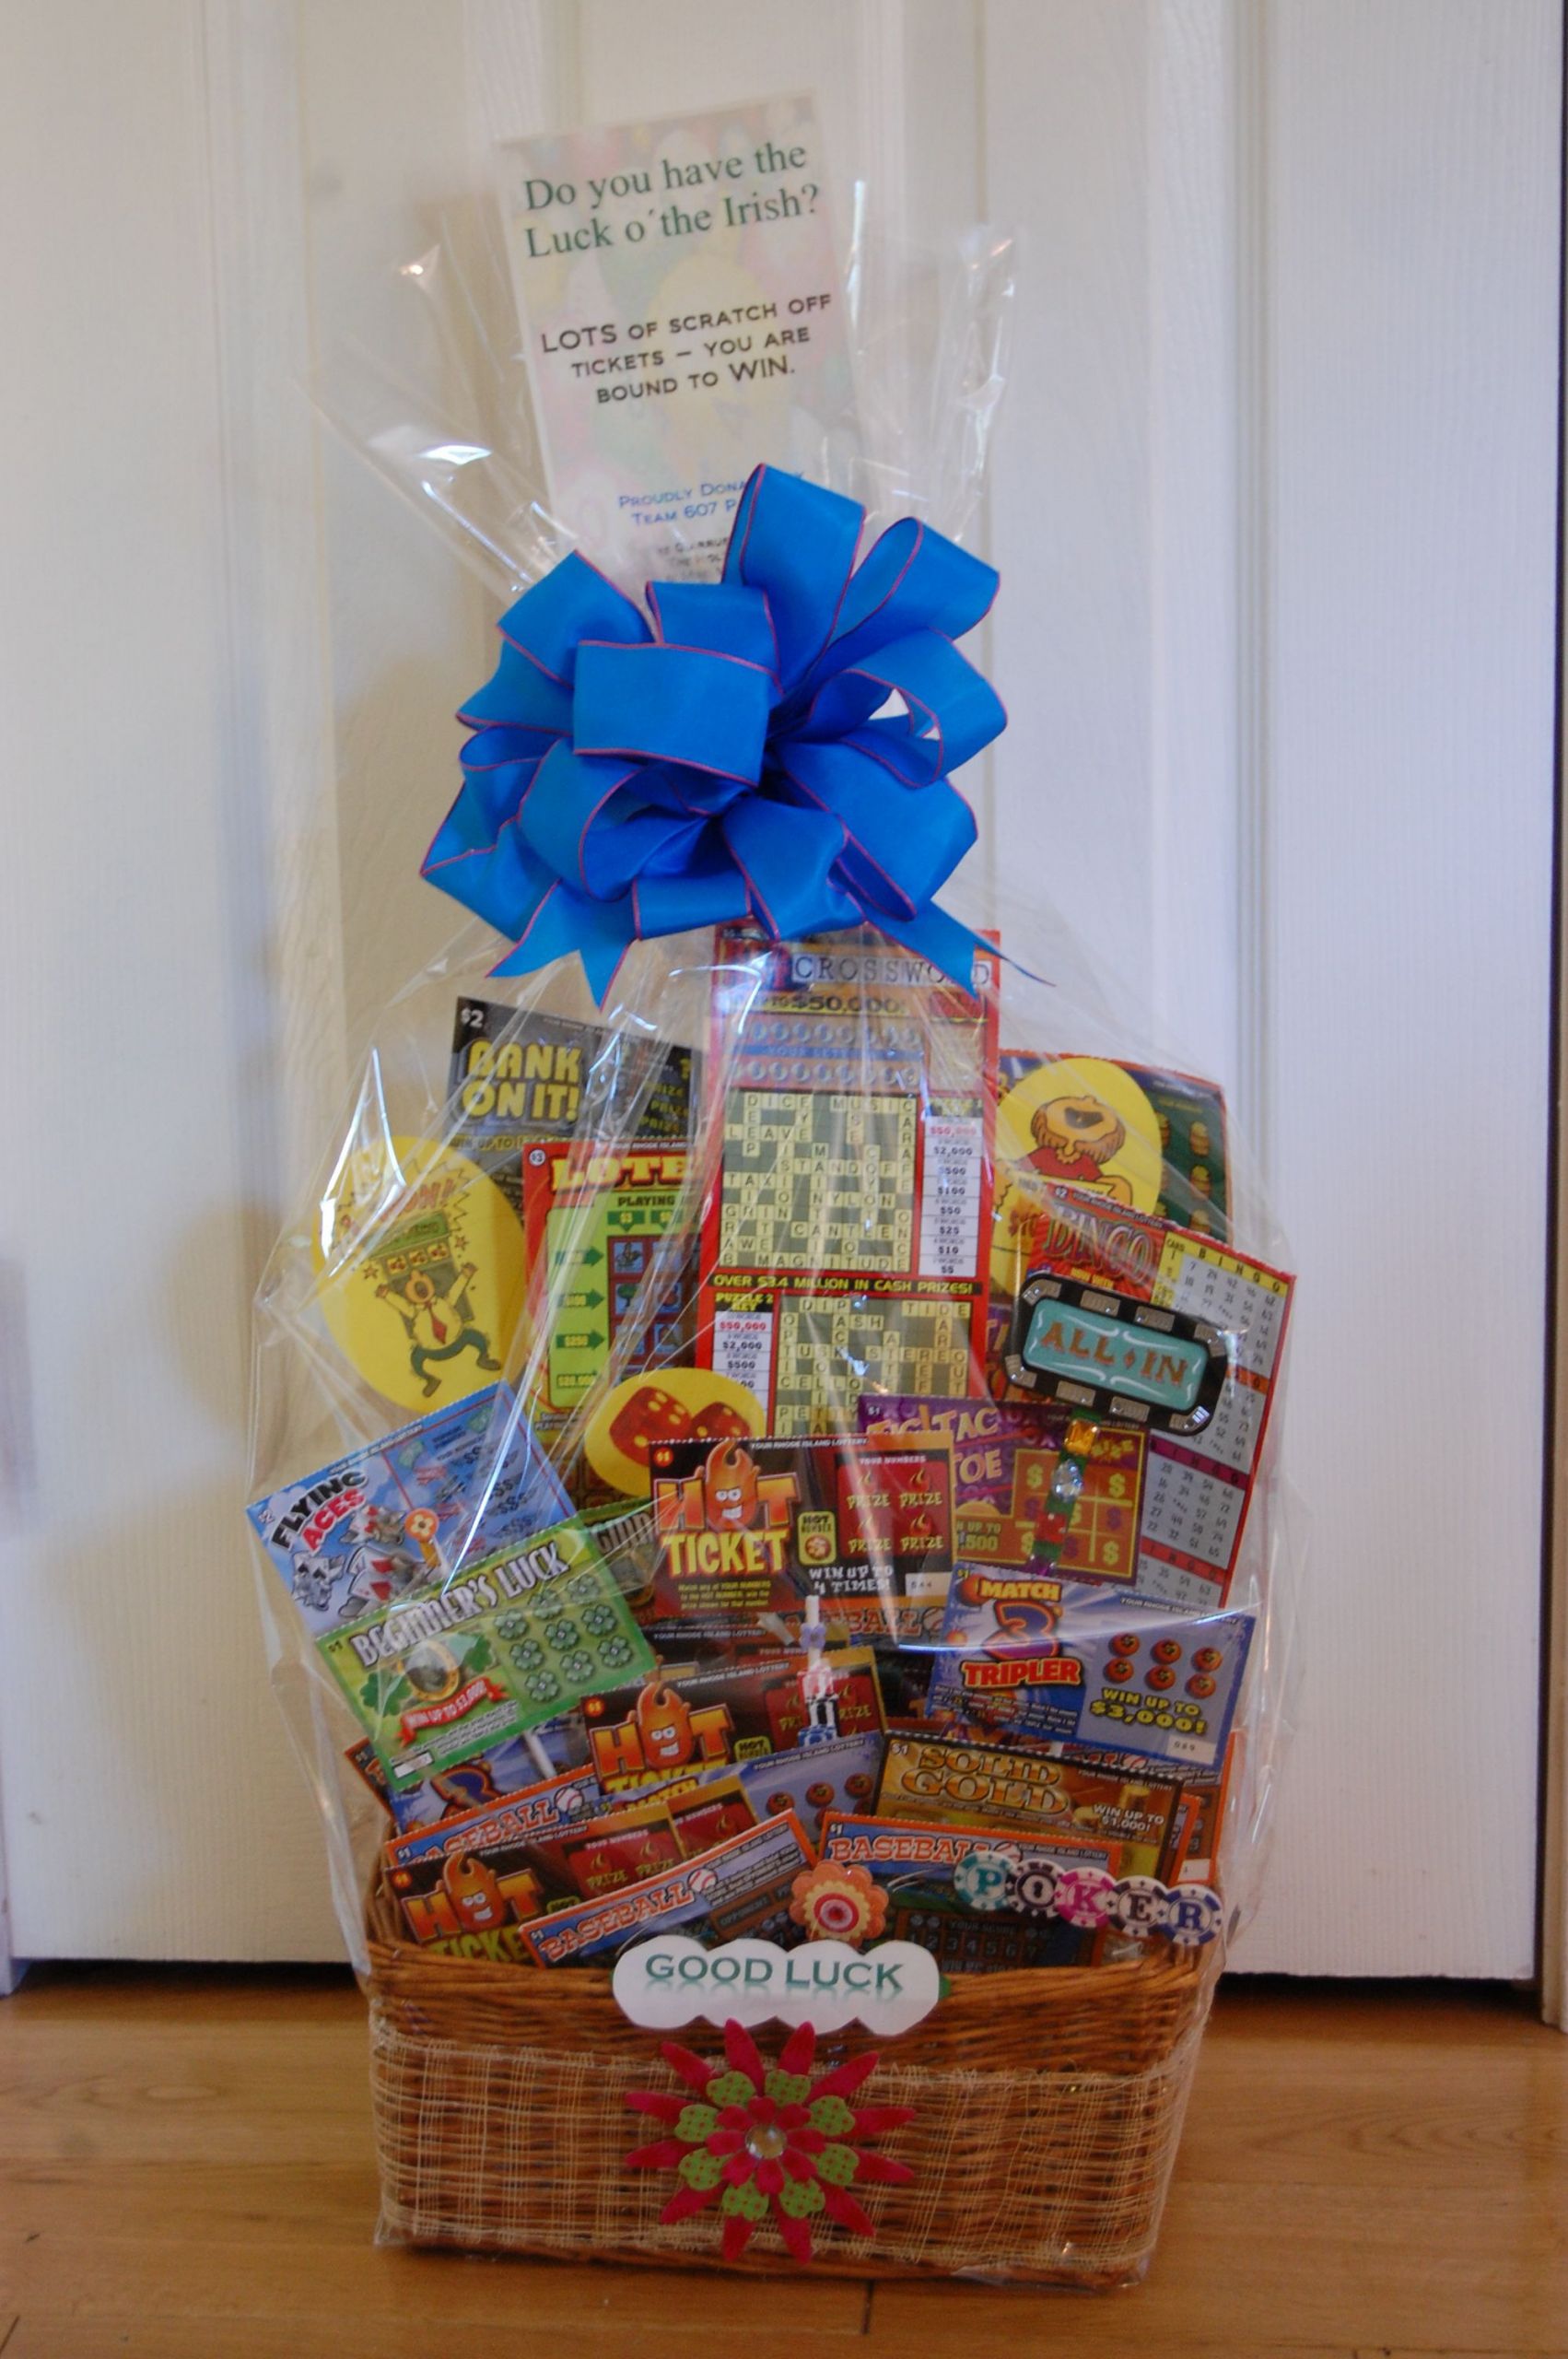 Large Gift Basket Ideas
 Lottery t basket Probably spent $25 on lottery tickets